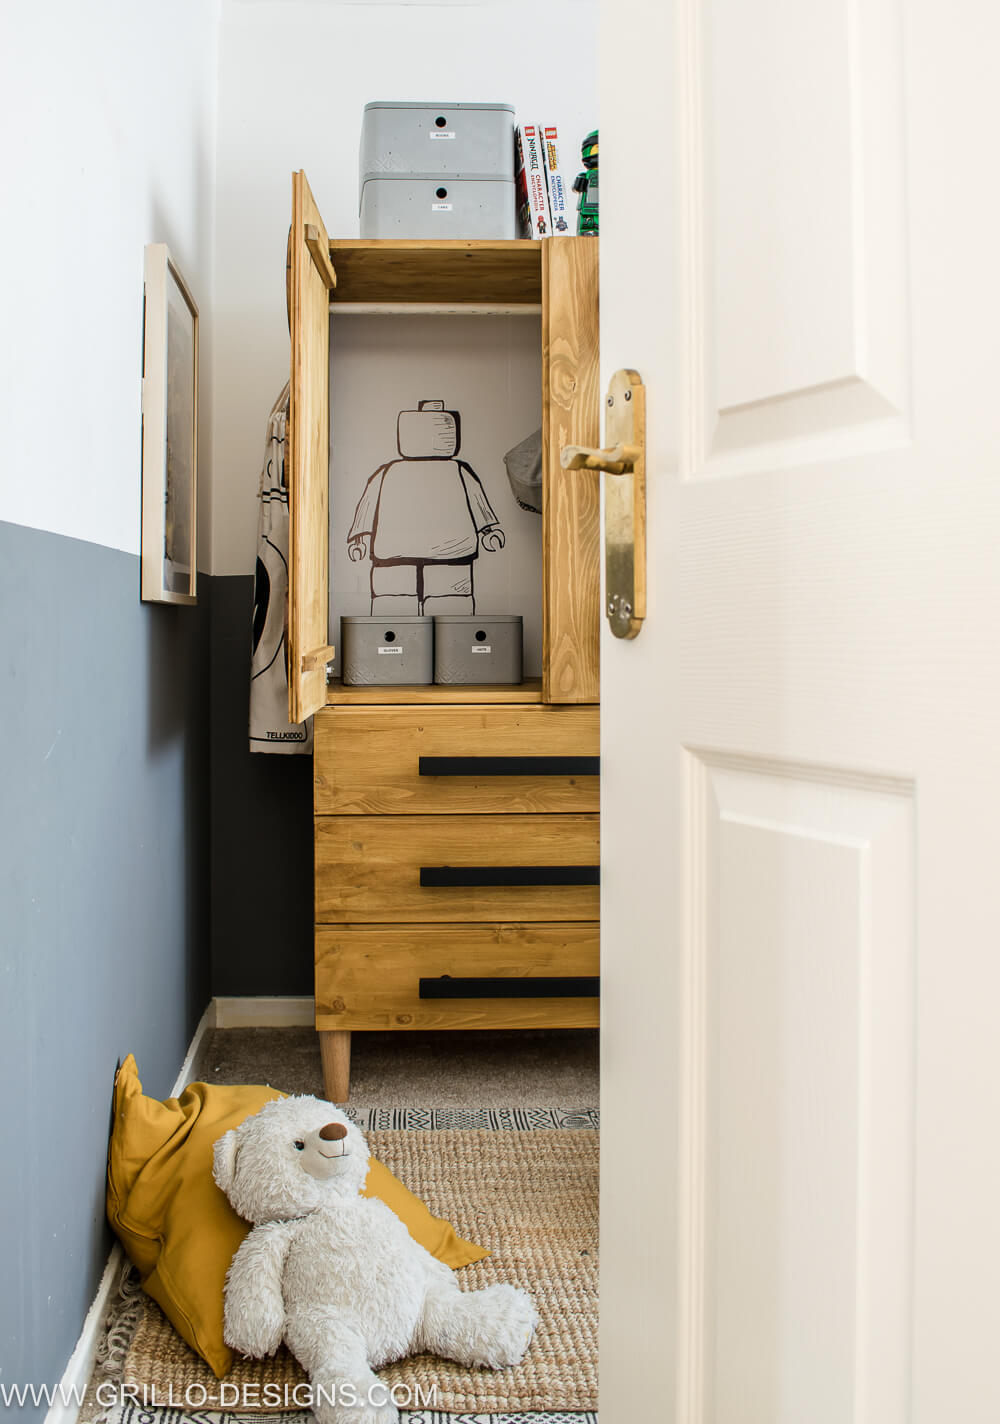 Easy Furniture Hack: How to Make a LEGO Inspired Wardrobe